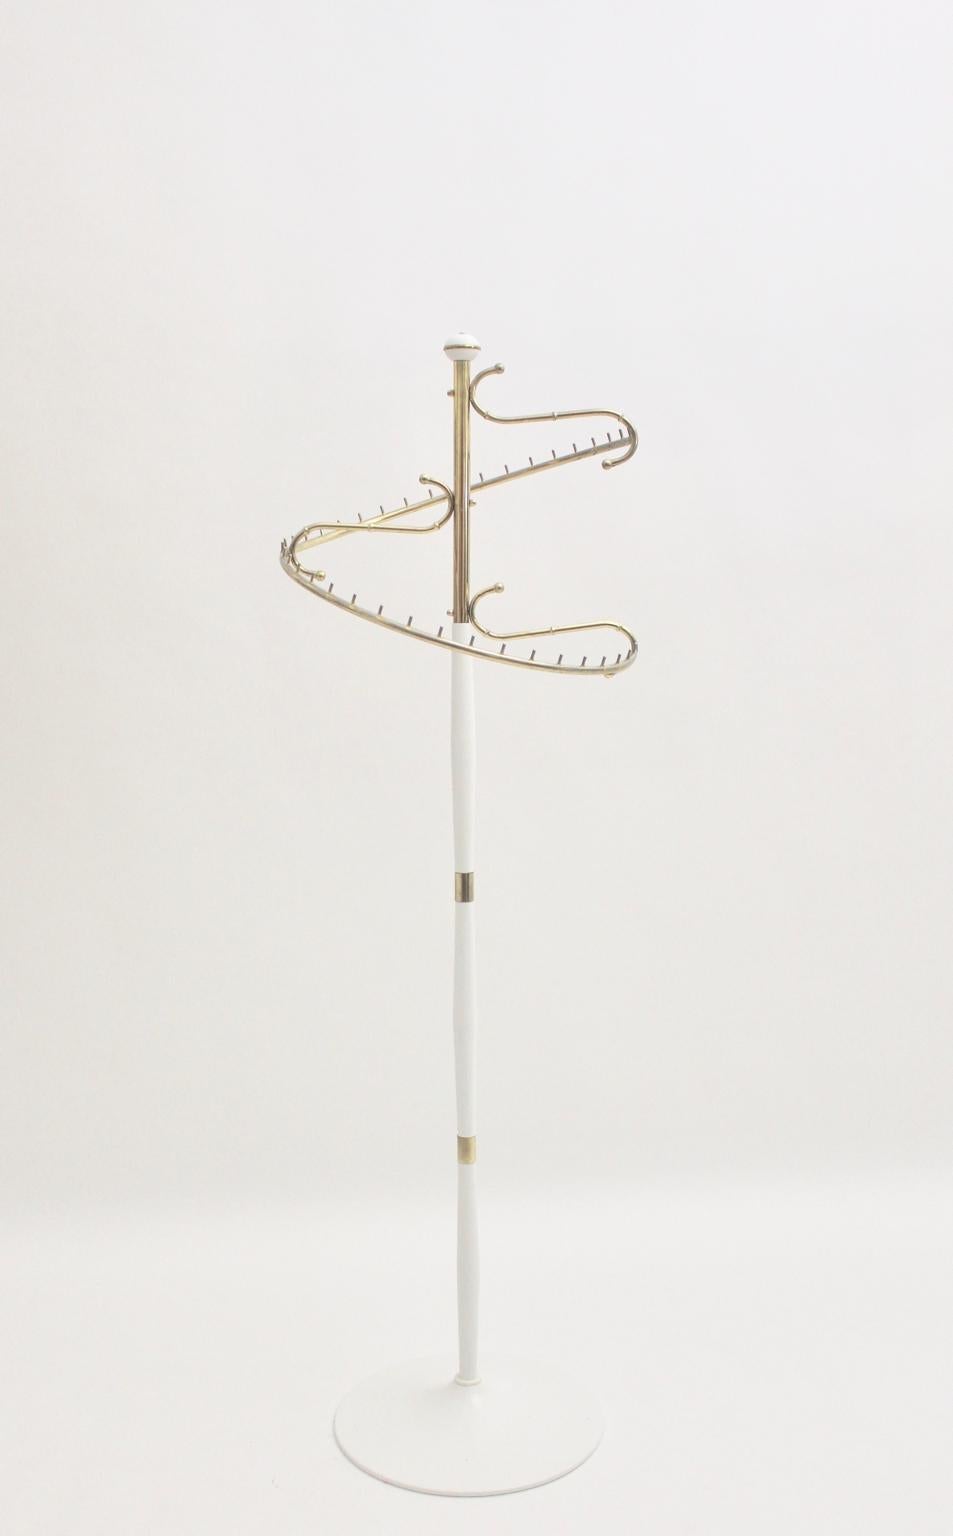 Rare swiveling white and brass mid-century modern fashion rack 1950s France.
This charming fashion rack was used in a fashion house.
It consists of tube steel white lacquered and brassed with a swiveling circle for clothes.
Worth to mention is that